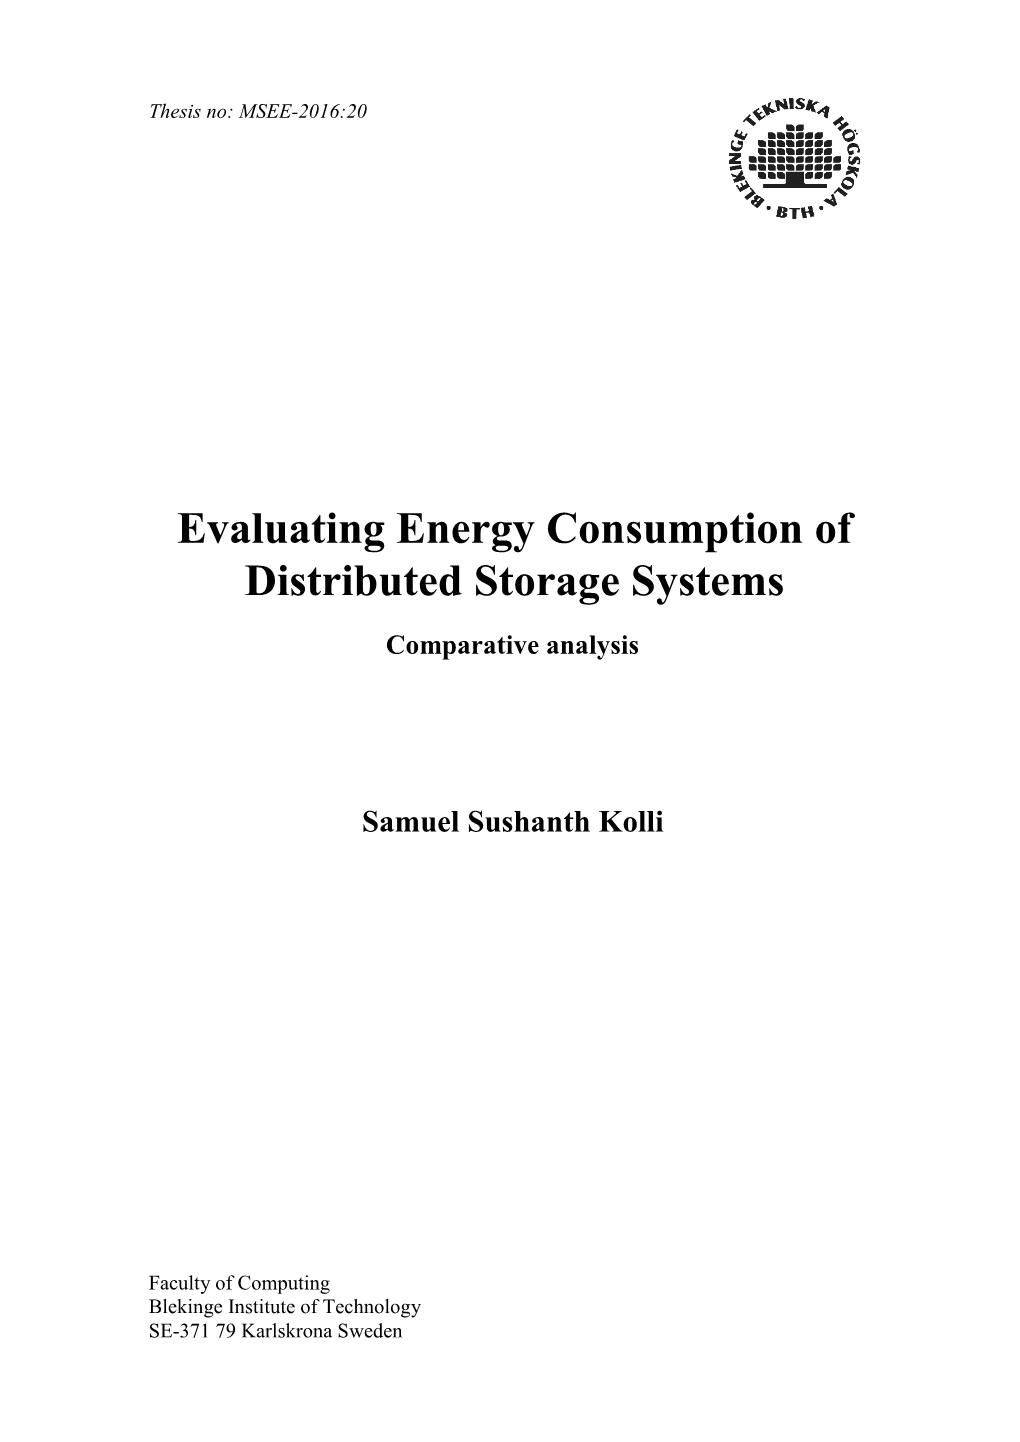 Evaluating Energy Consumption of Distributed Storage Systems Comparative Analysis